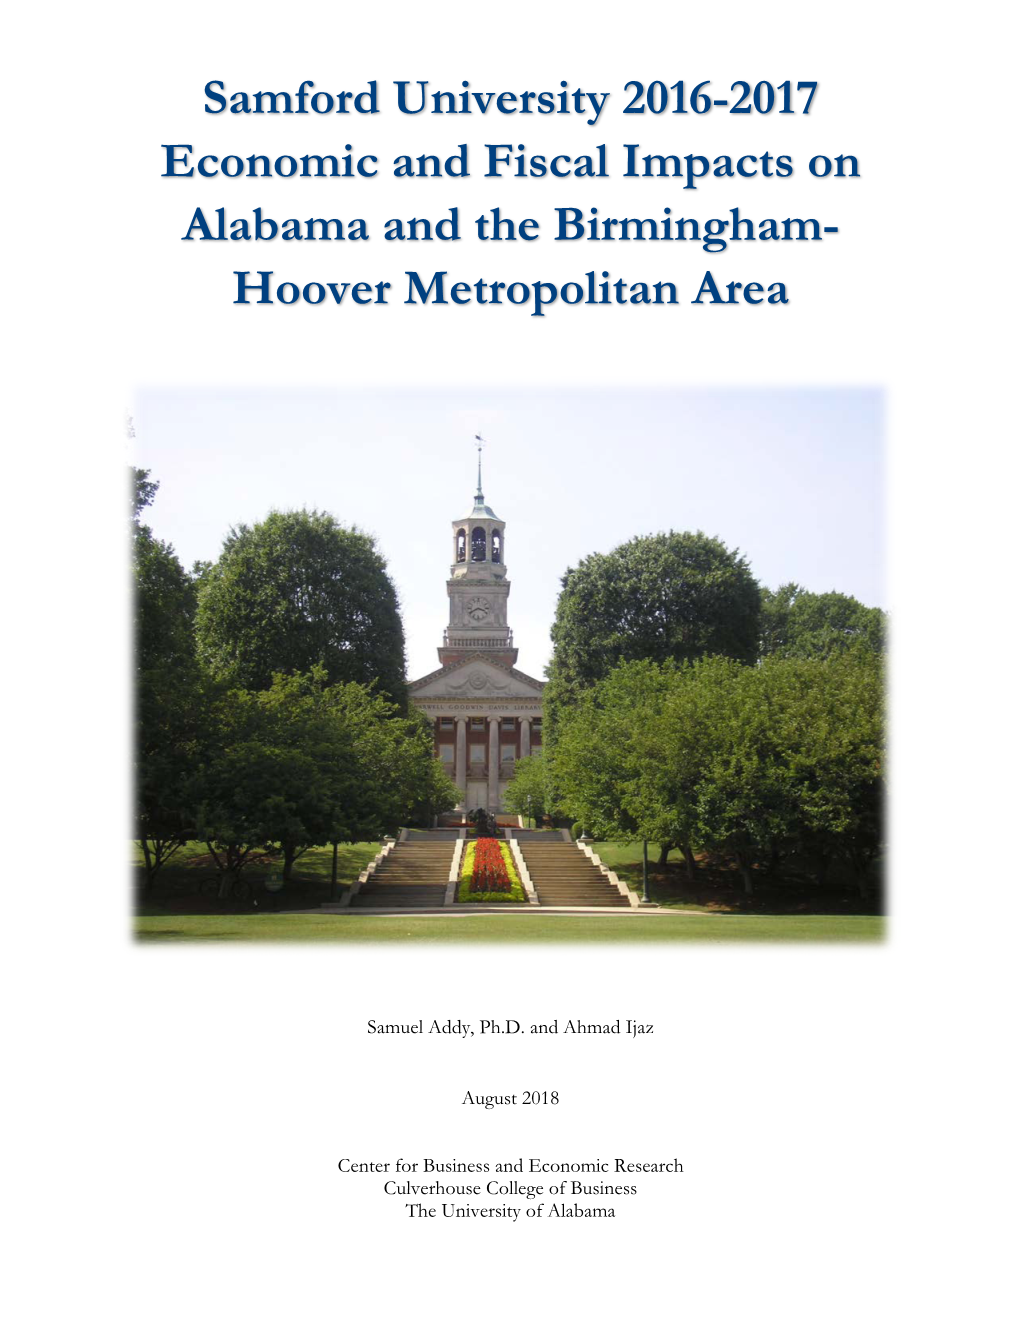 Samford University 2016-2017 Economic and Fiscal Impacts on Alabama and the Birmingham- Hoover Metropolitan Area